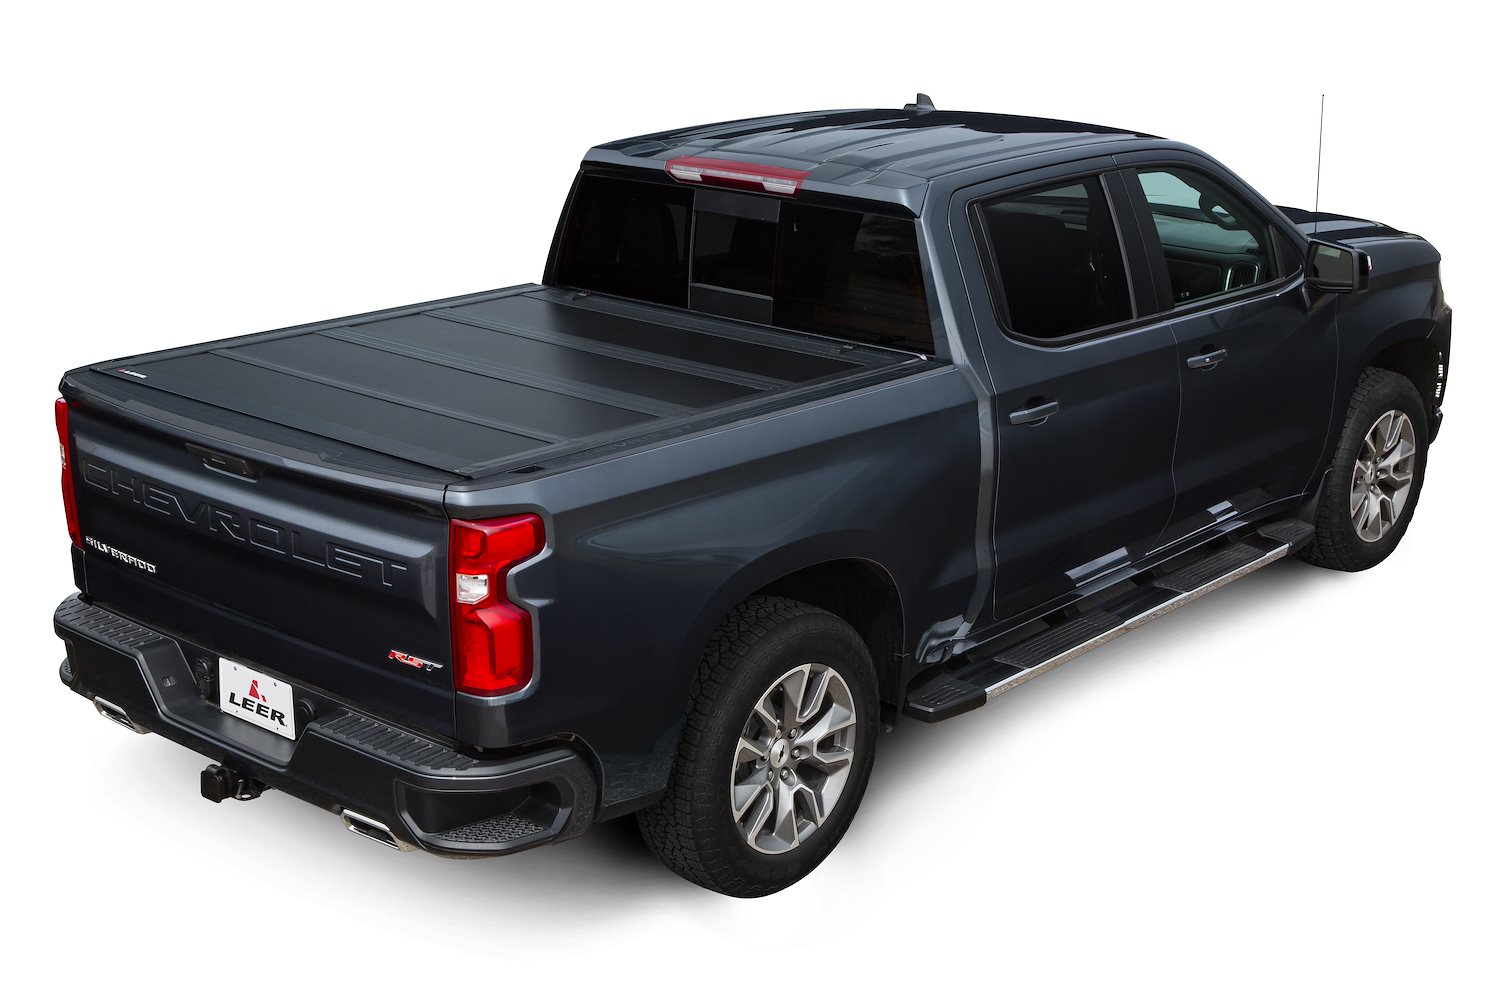 HF650M Hard Quad-Folding Tonneau Cover Fits Select Chevrolet Colorado, GMC Canyon [Bed Length: 6 ft. 2 in.]